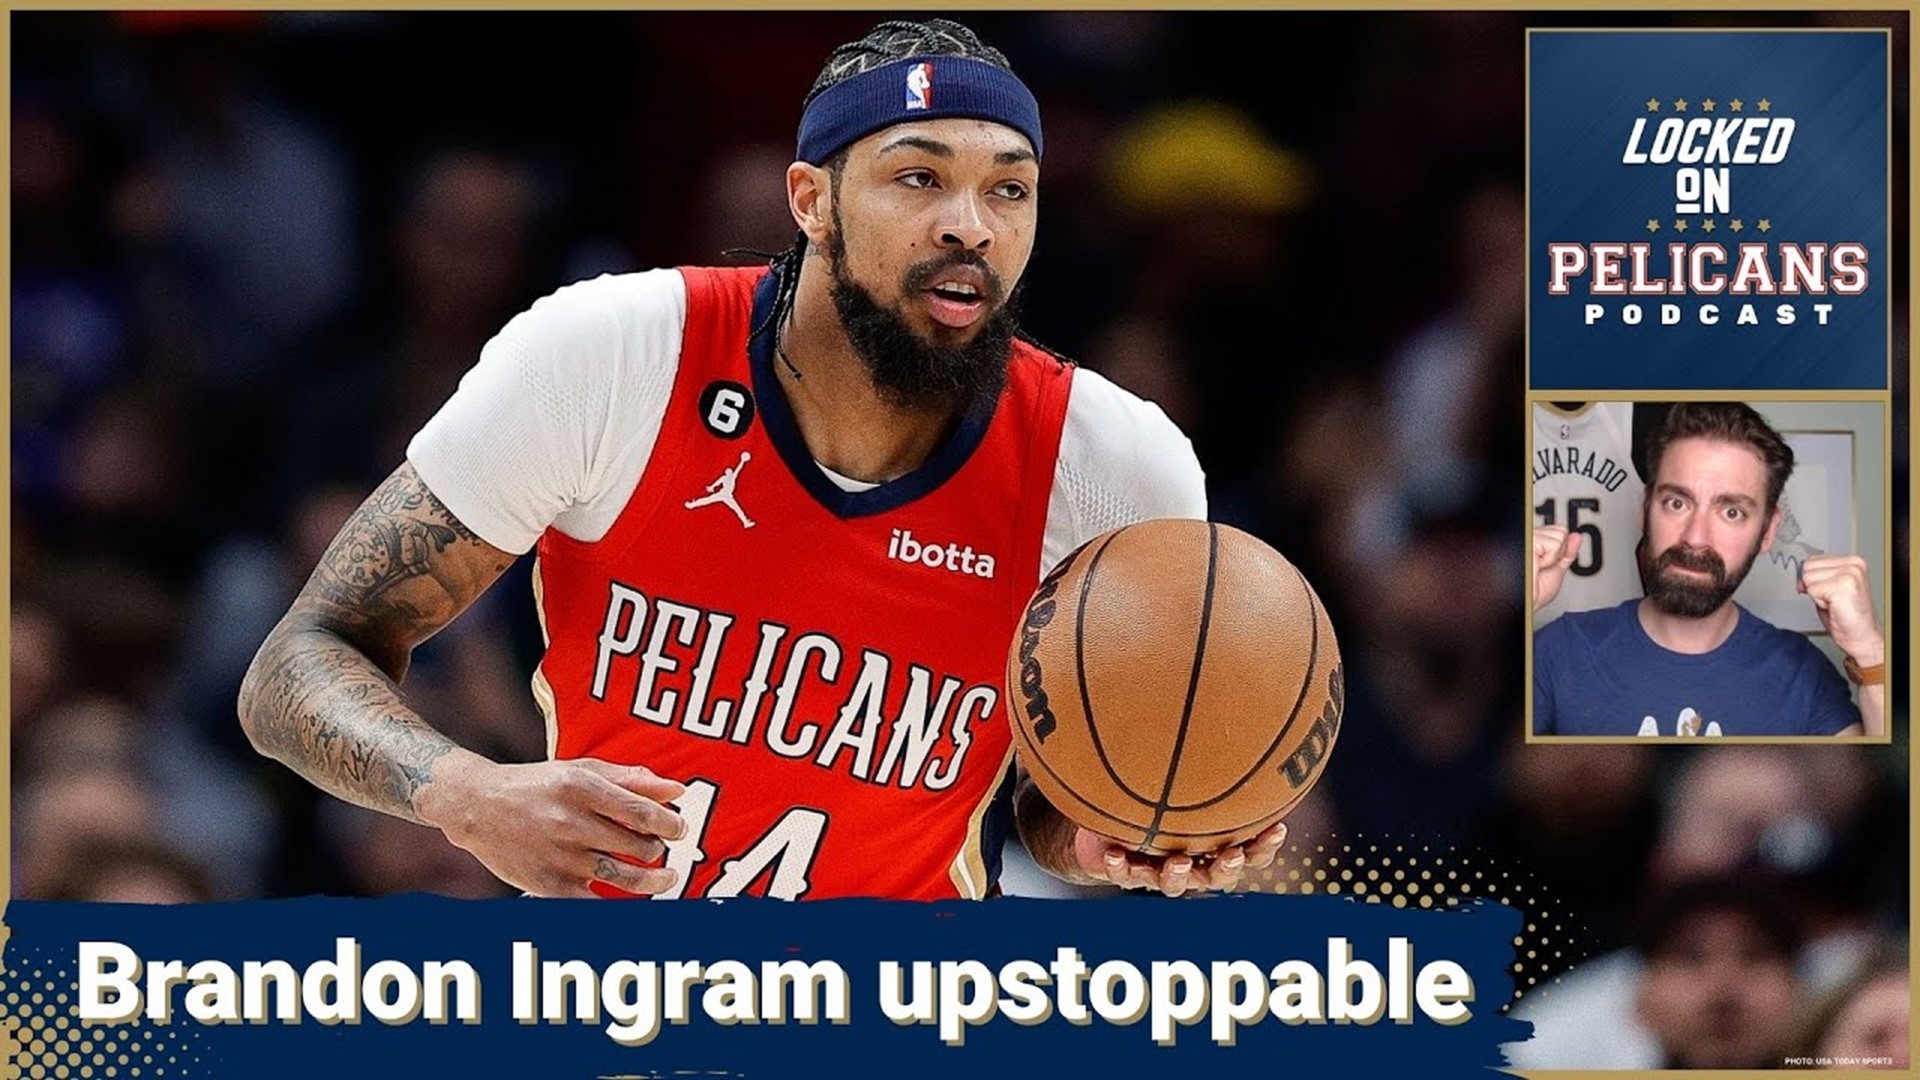 Brandon Ingram put up his 2nd career triple double as the New Orleans Pelicans got a big win over the Denver Nuggets. Jake Madison breaks it down